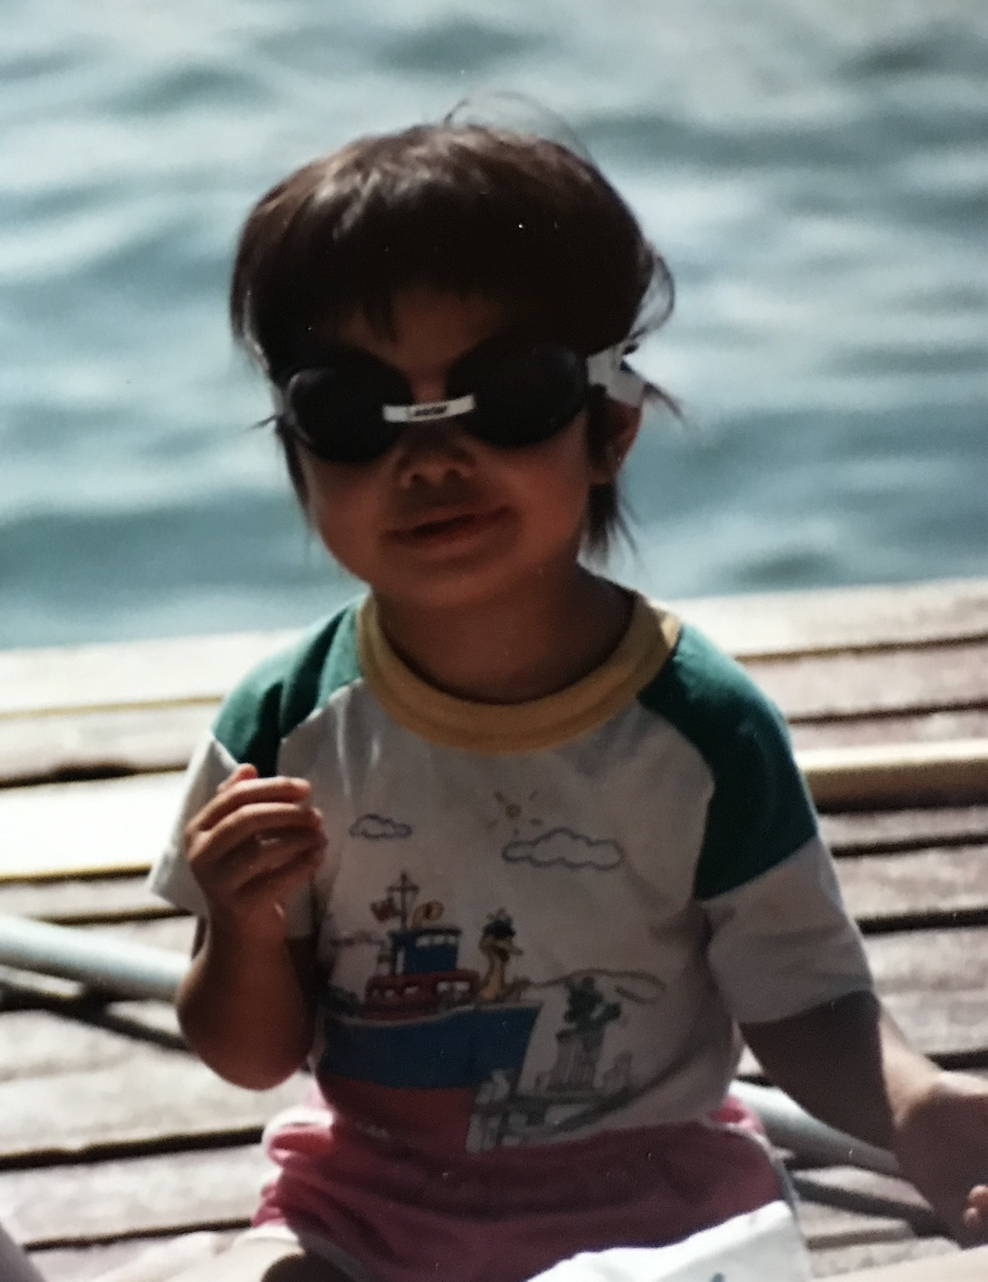 Adrienne as a child wearing swim goggles.